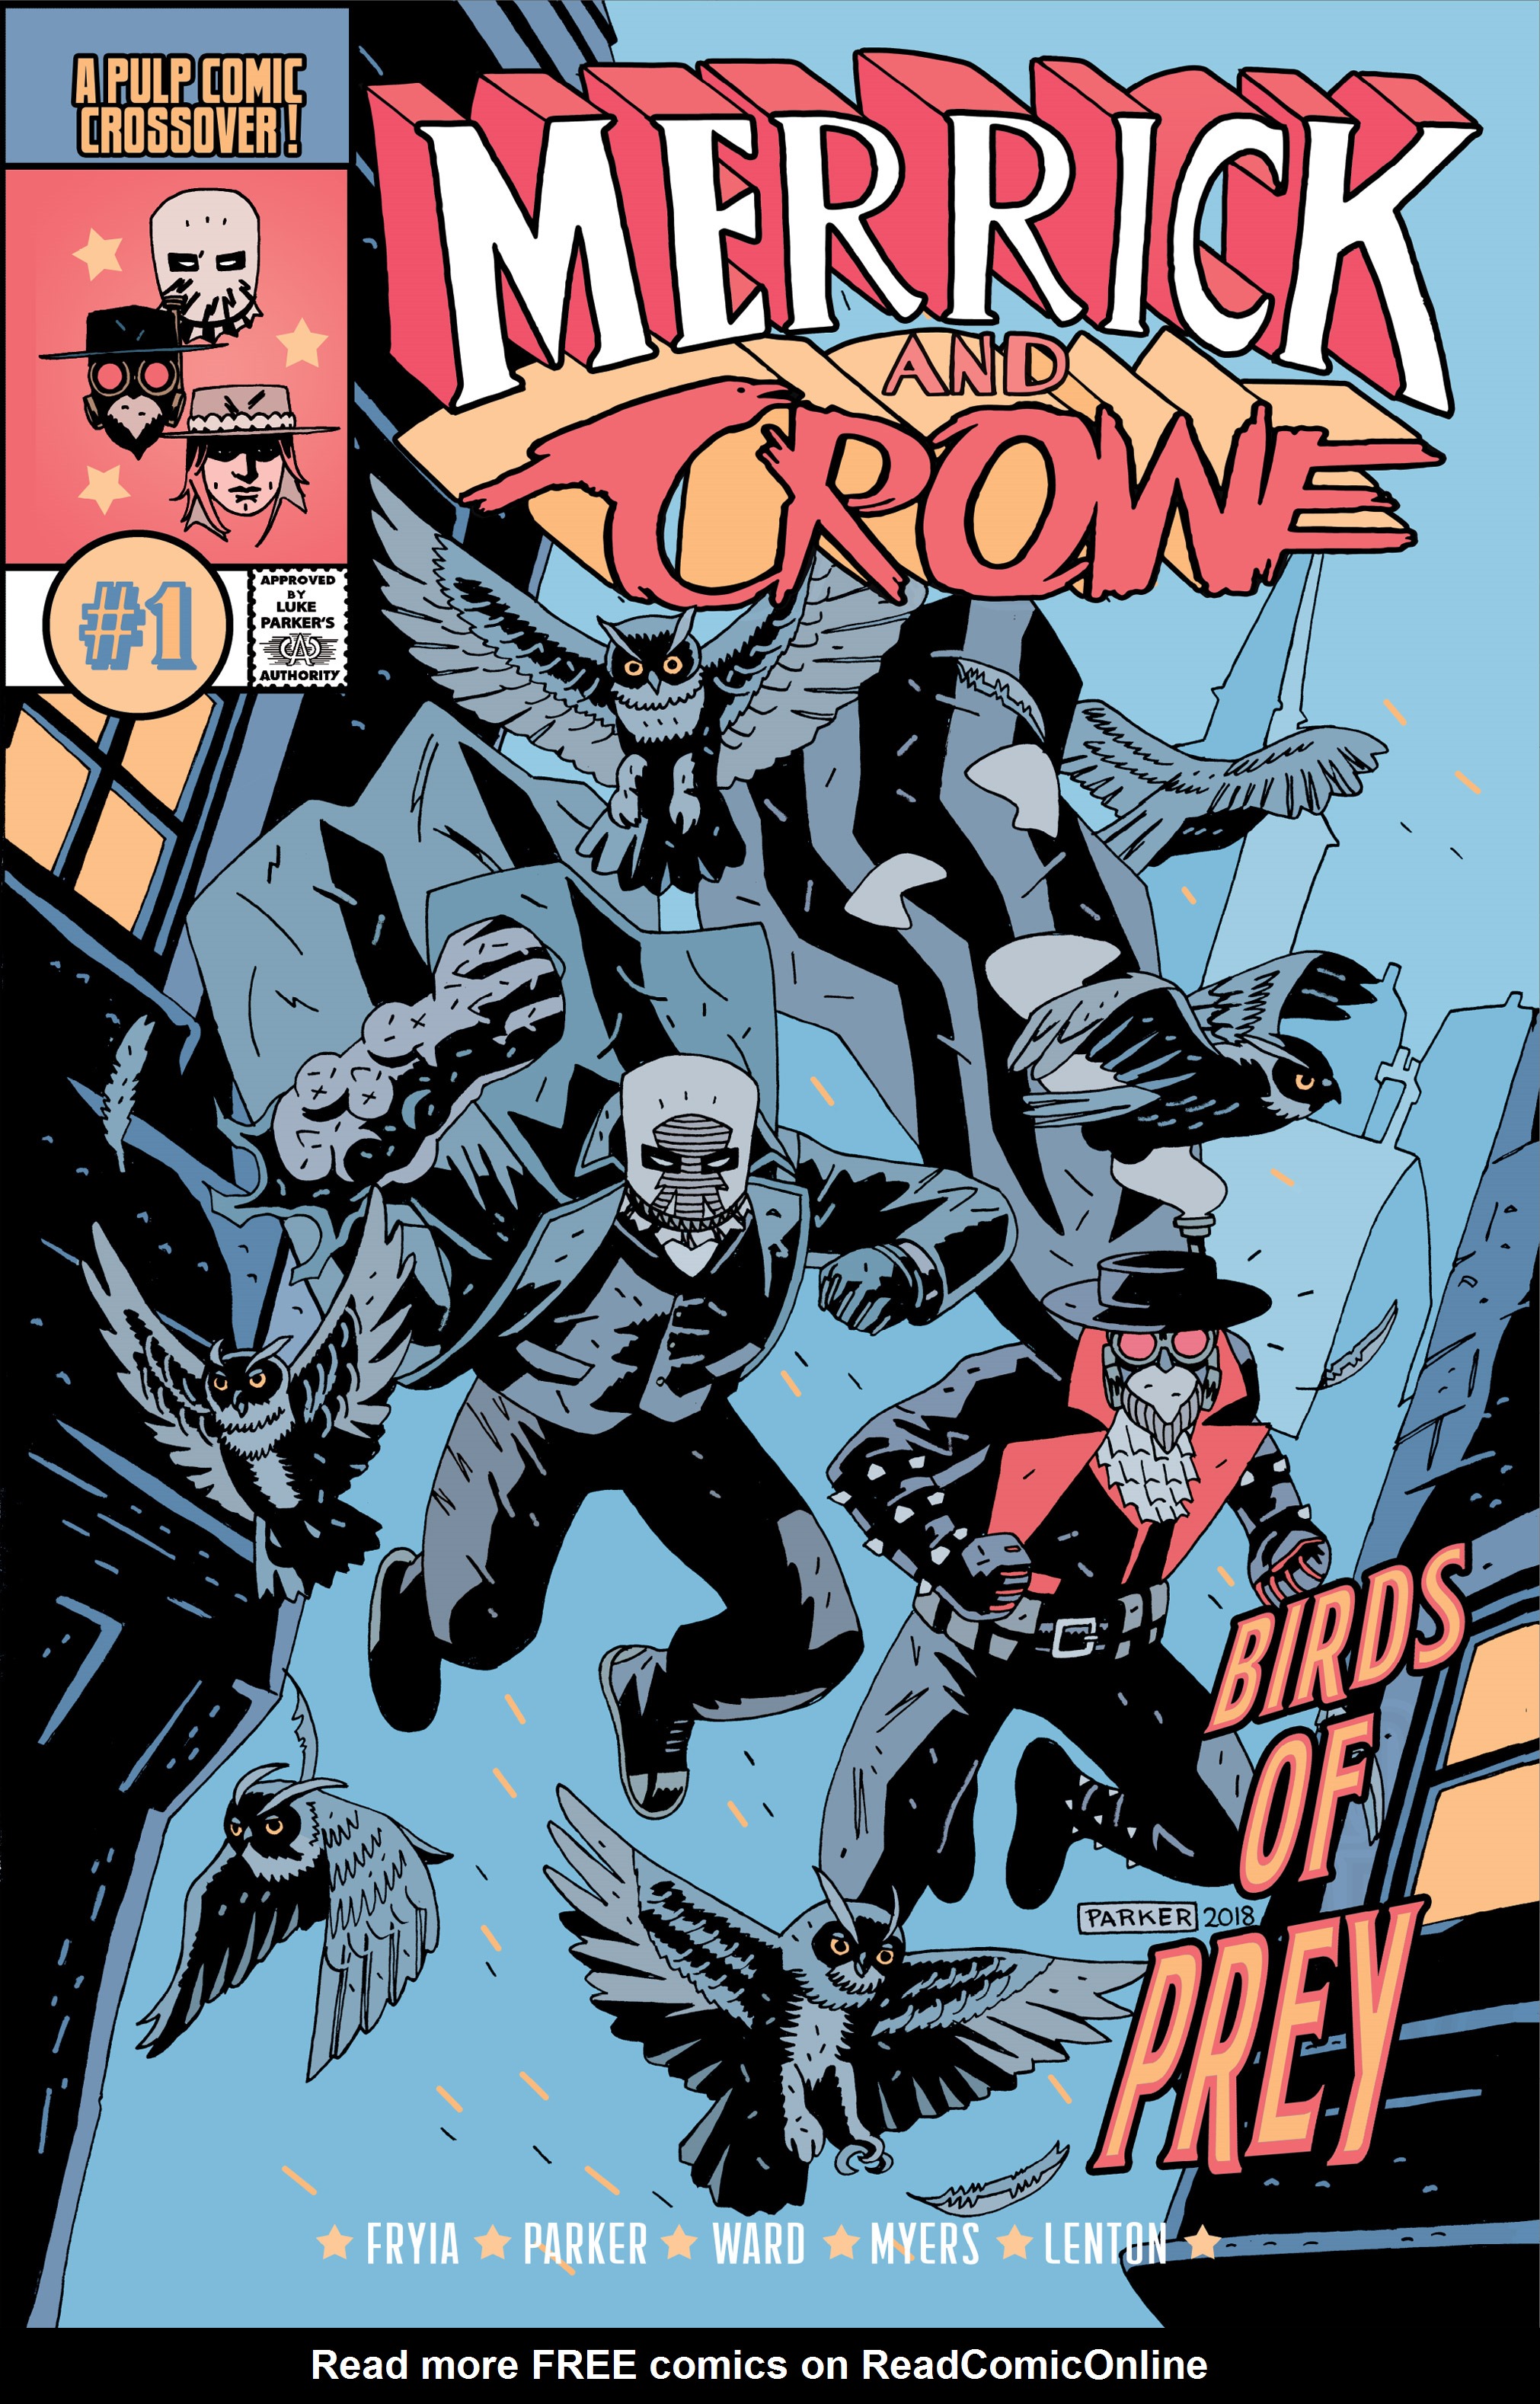 Read online Merrick and Crowe comic -  Issue # Full - 1